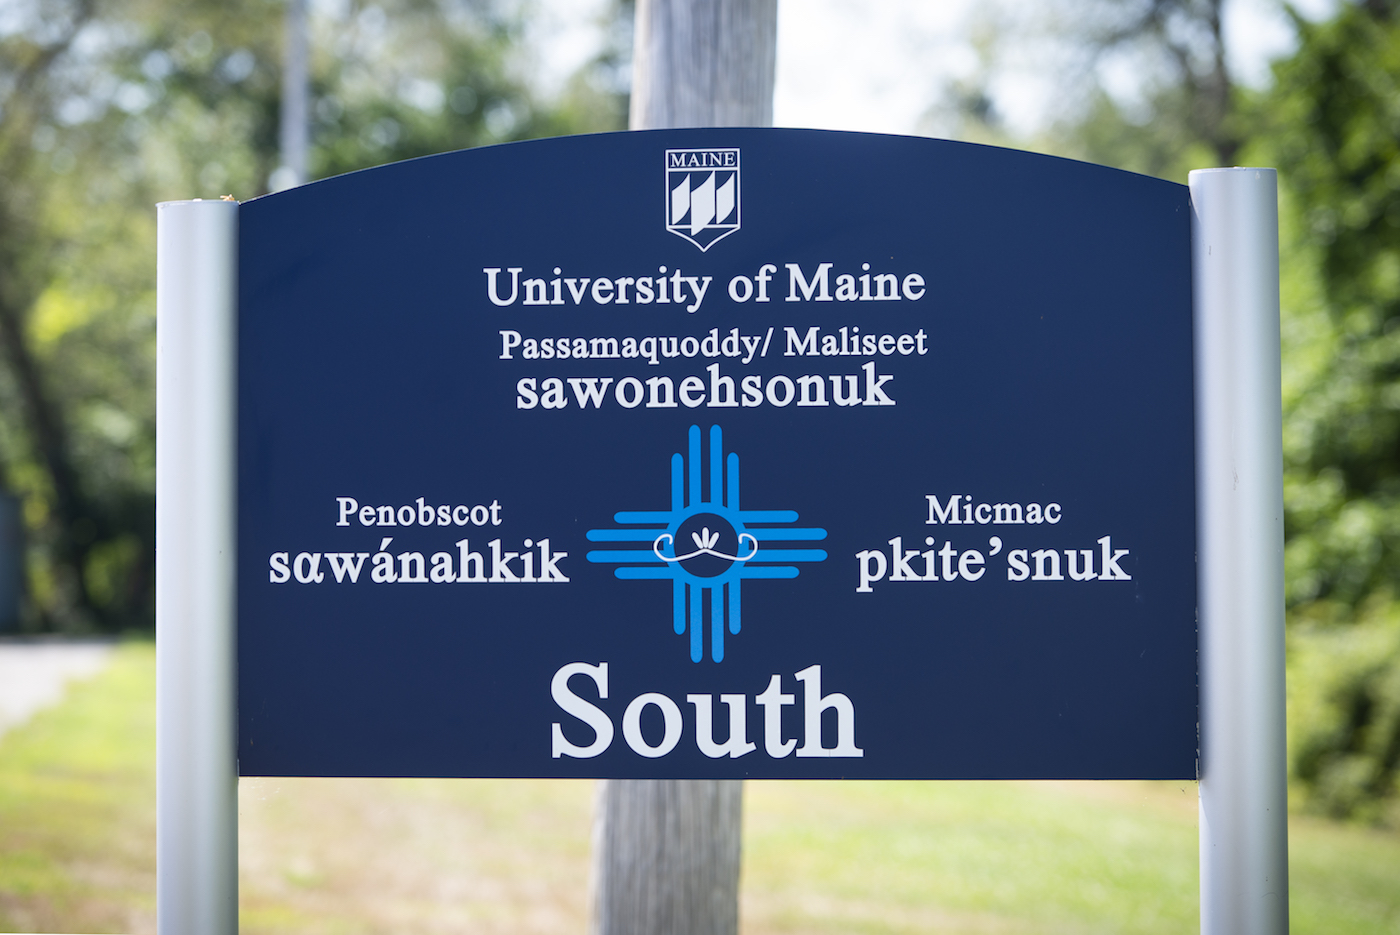 A photo of the South sign on campus